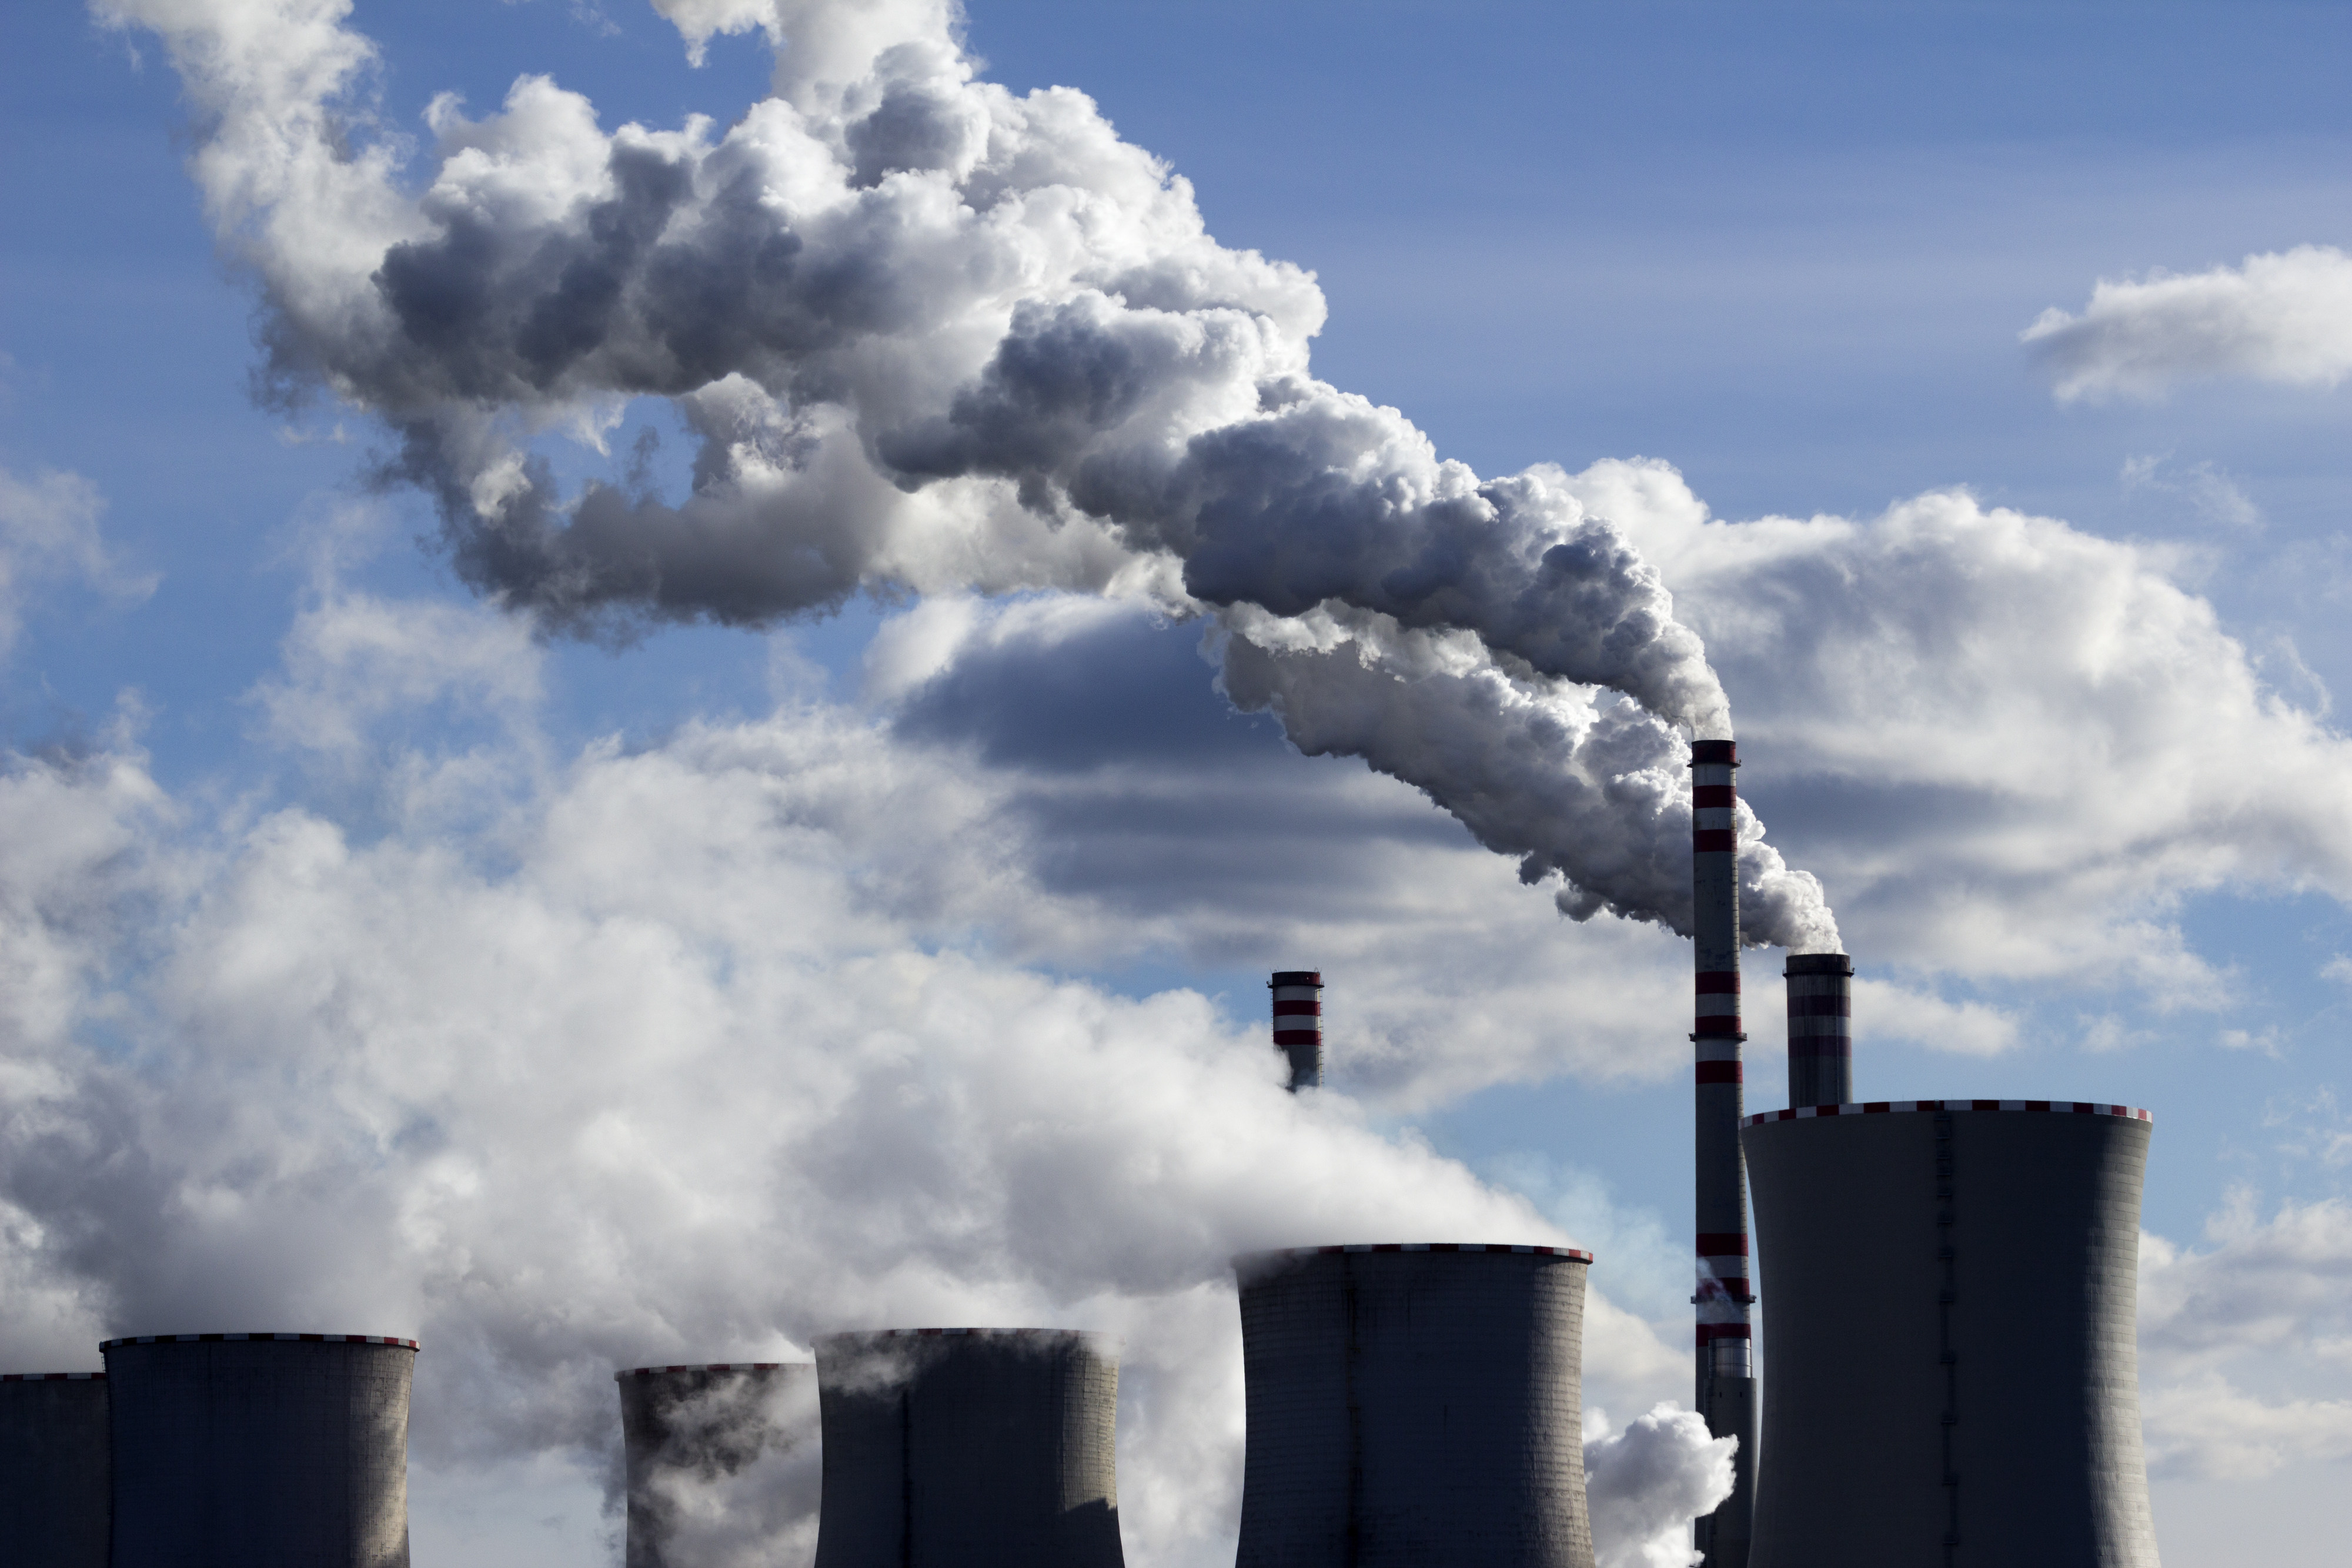 High pollution from coal power plant. Indonesia, the world’s third-largest coal miner, after China and India, undercounts methane emissions. Photo: Shutterstock